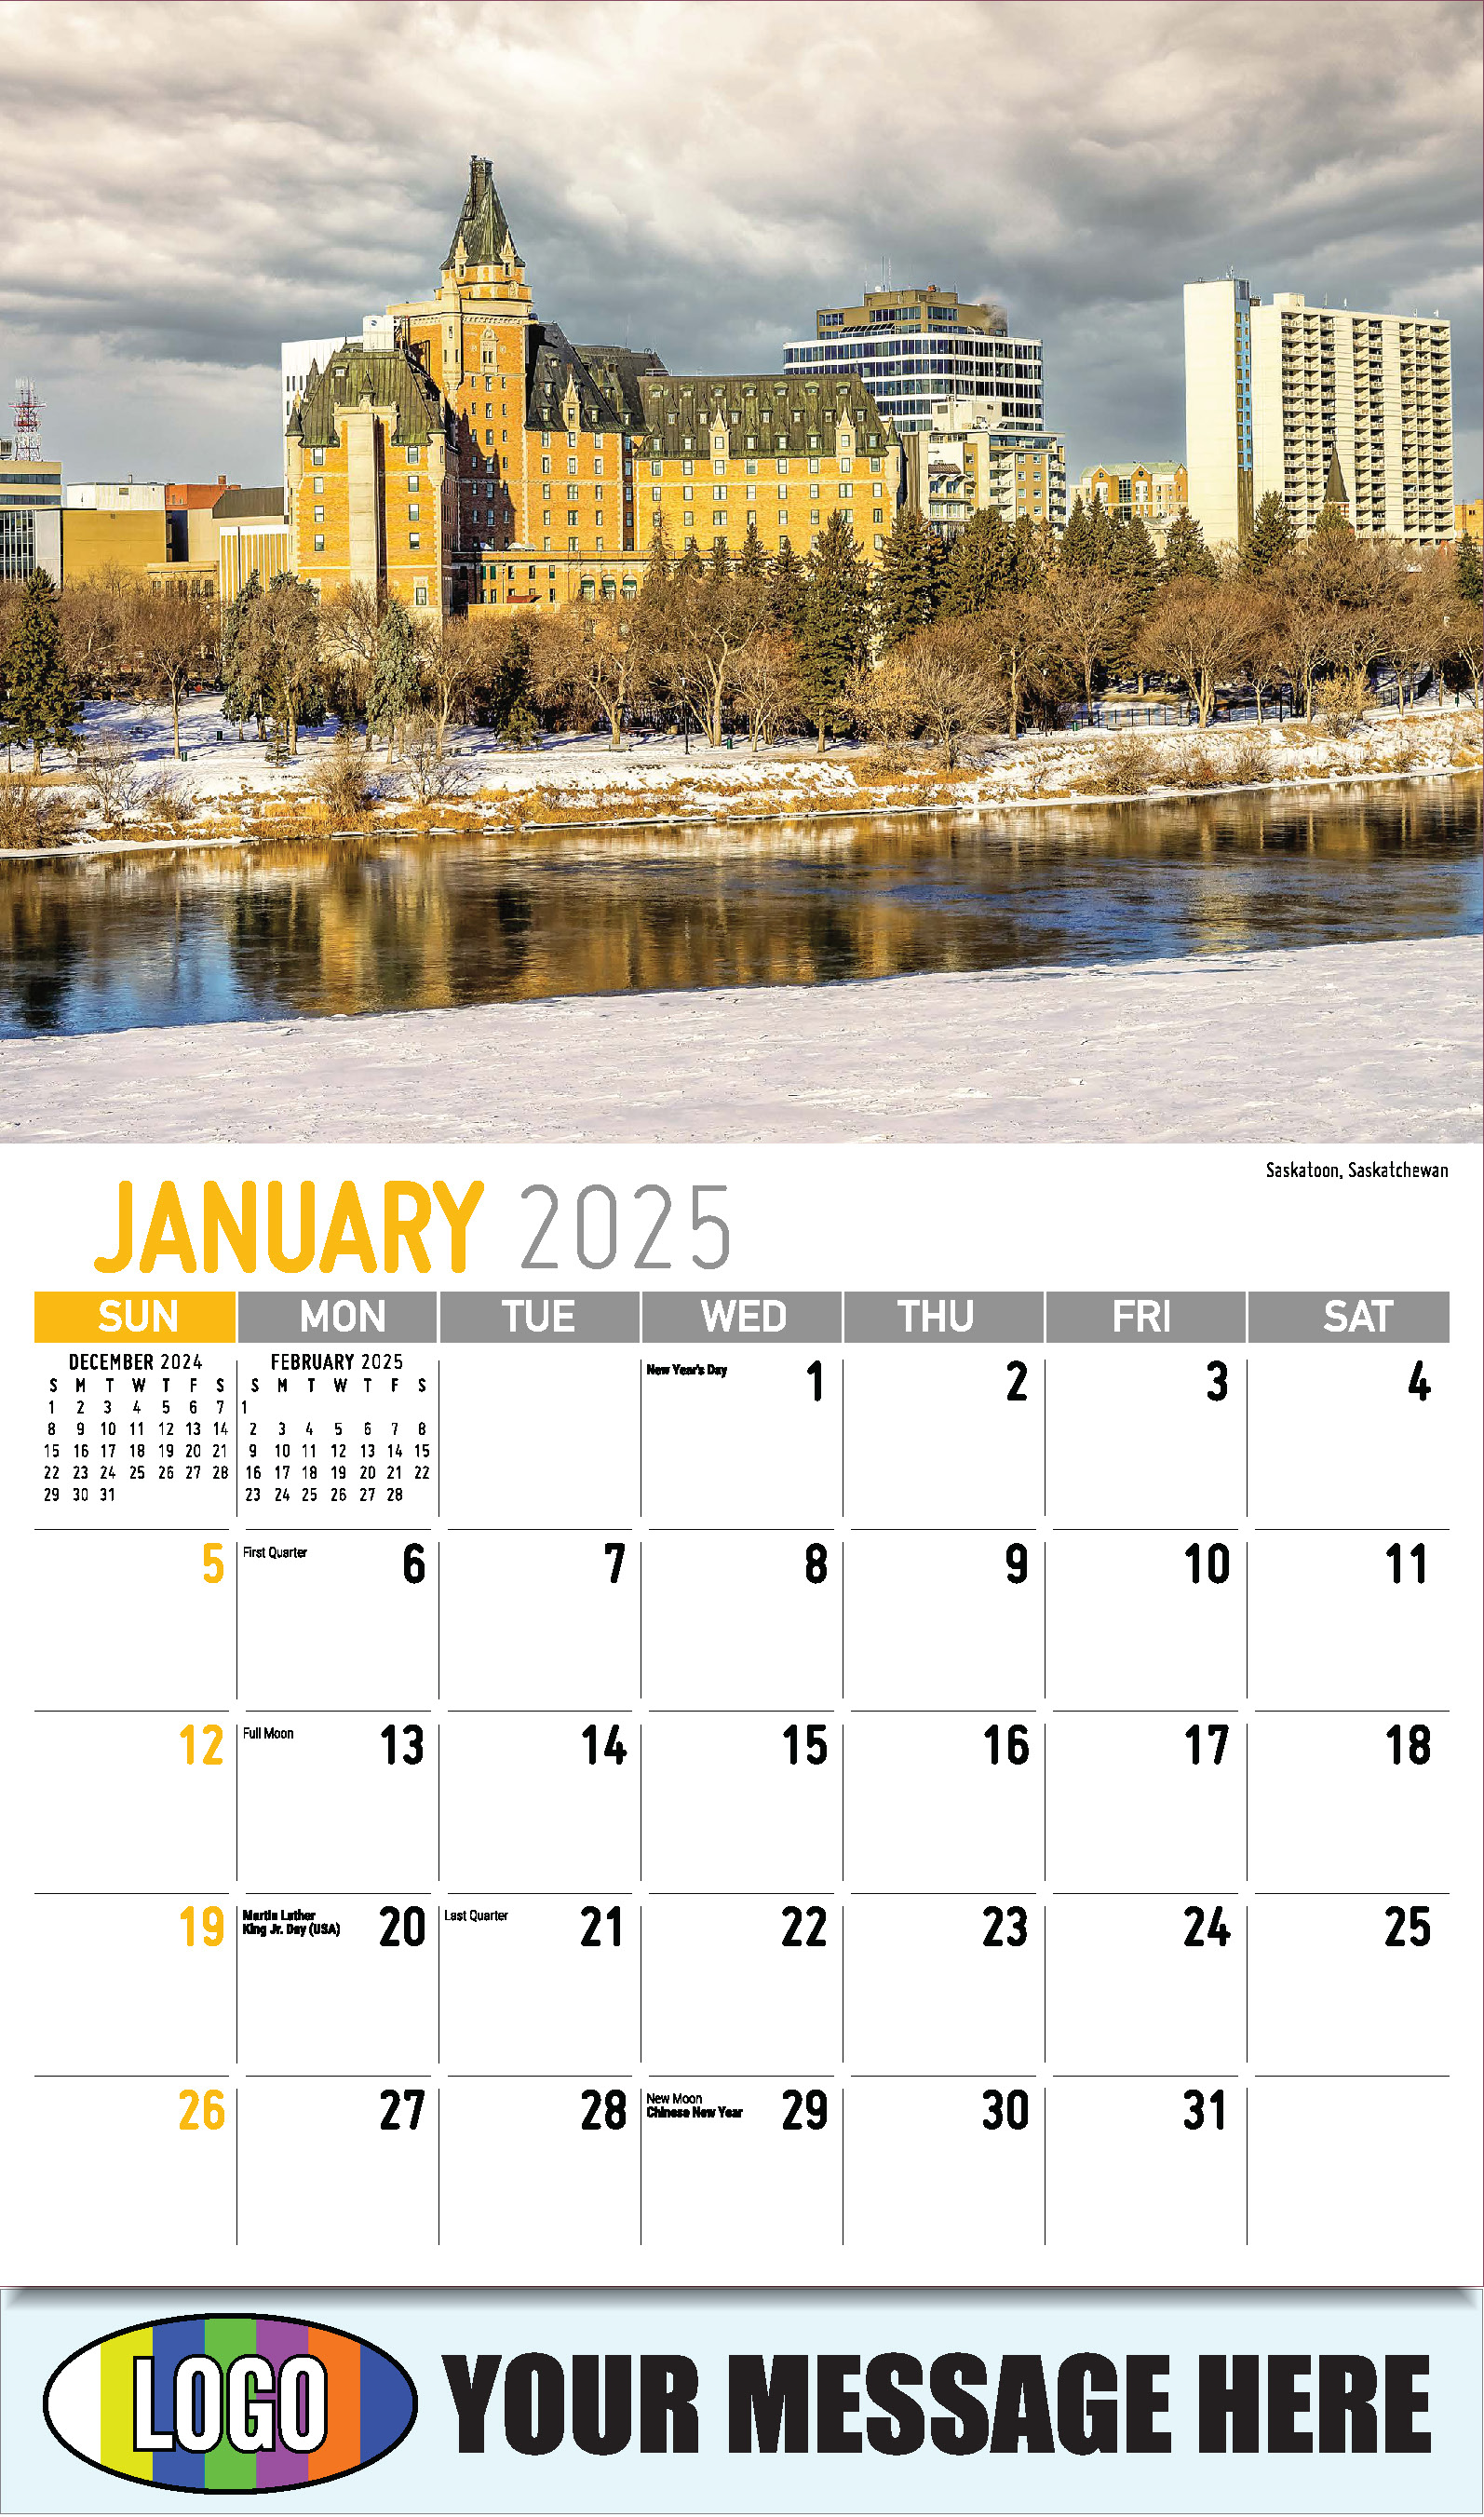 Scenes of Western Canada 2025 Business Promotional Wall Calendar - January